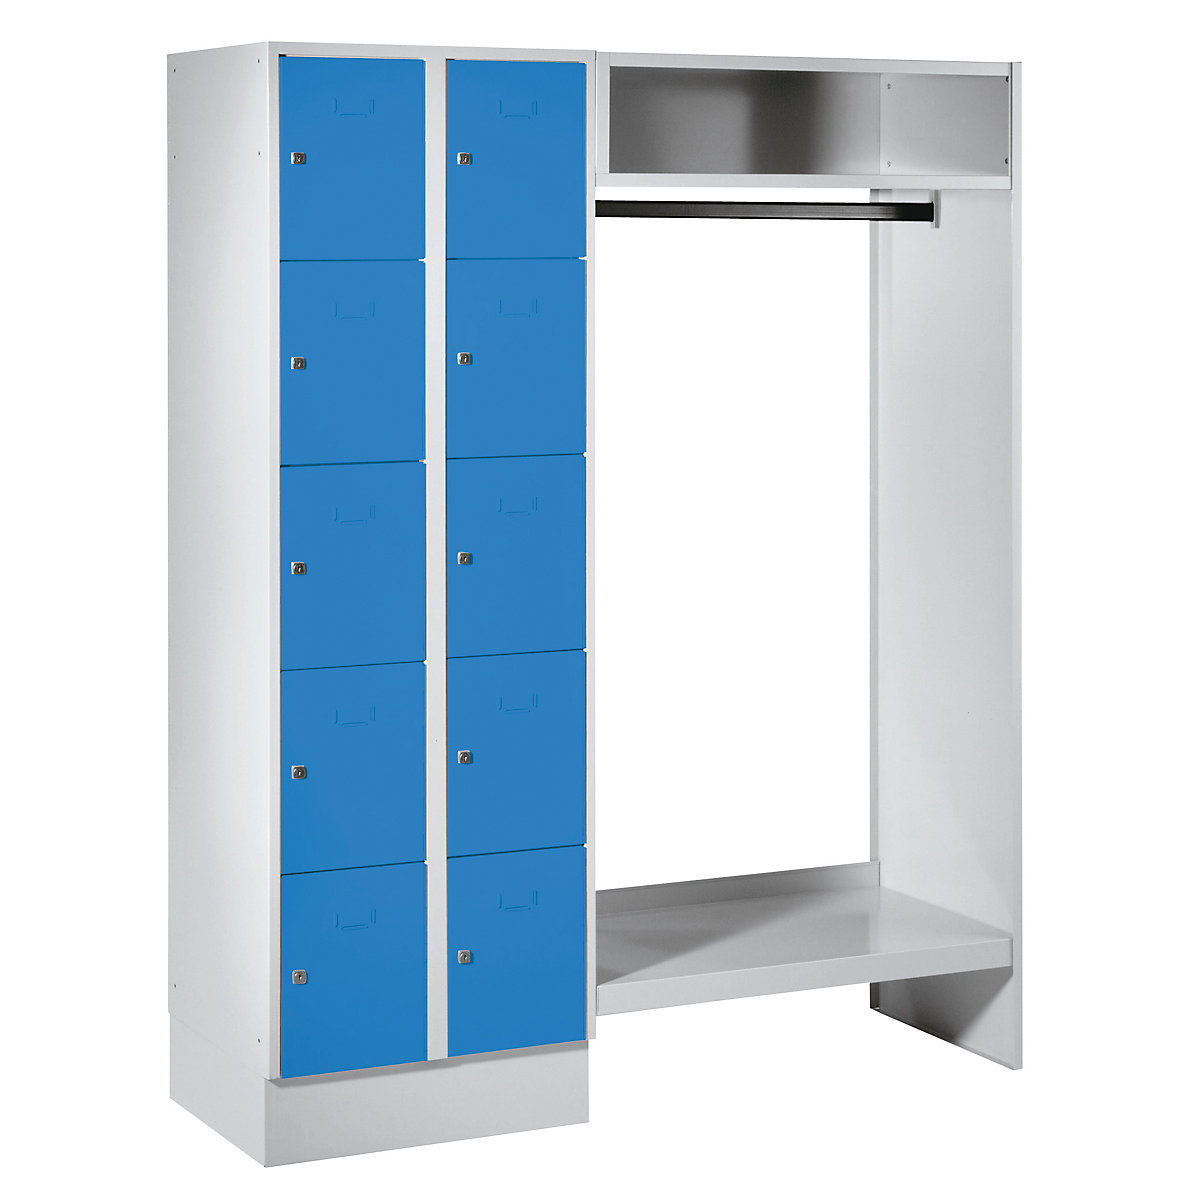 Cloakroom locker system – Wolf, 10 compartments on left, 10 coat hangers, overall width 1470 mm, compartment width 298 mm, light blue/light grey-9